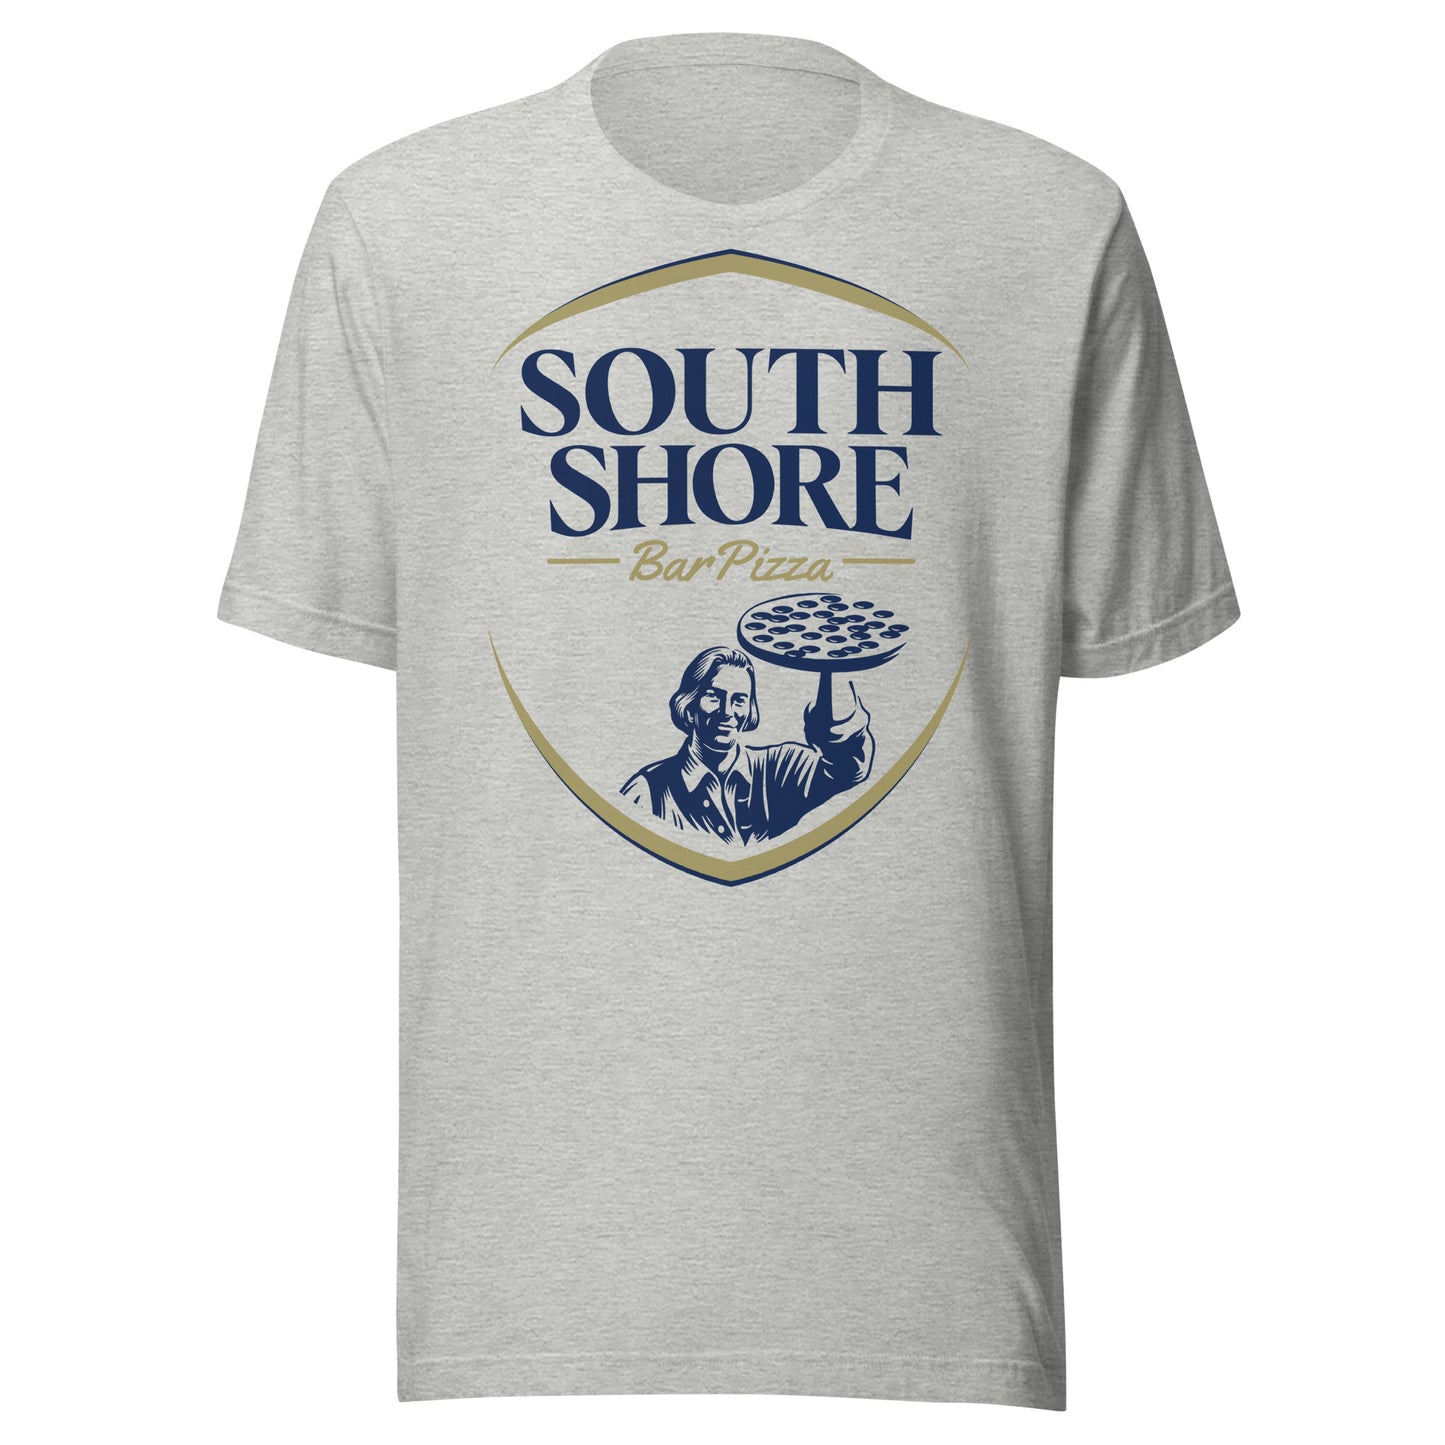 South Shore Bar Pizza - Founding Fathers Boston Tee